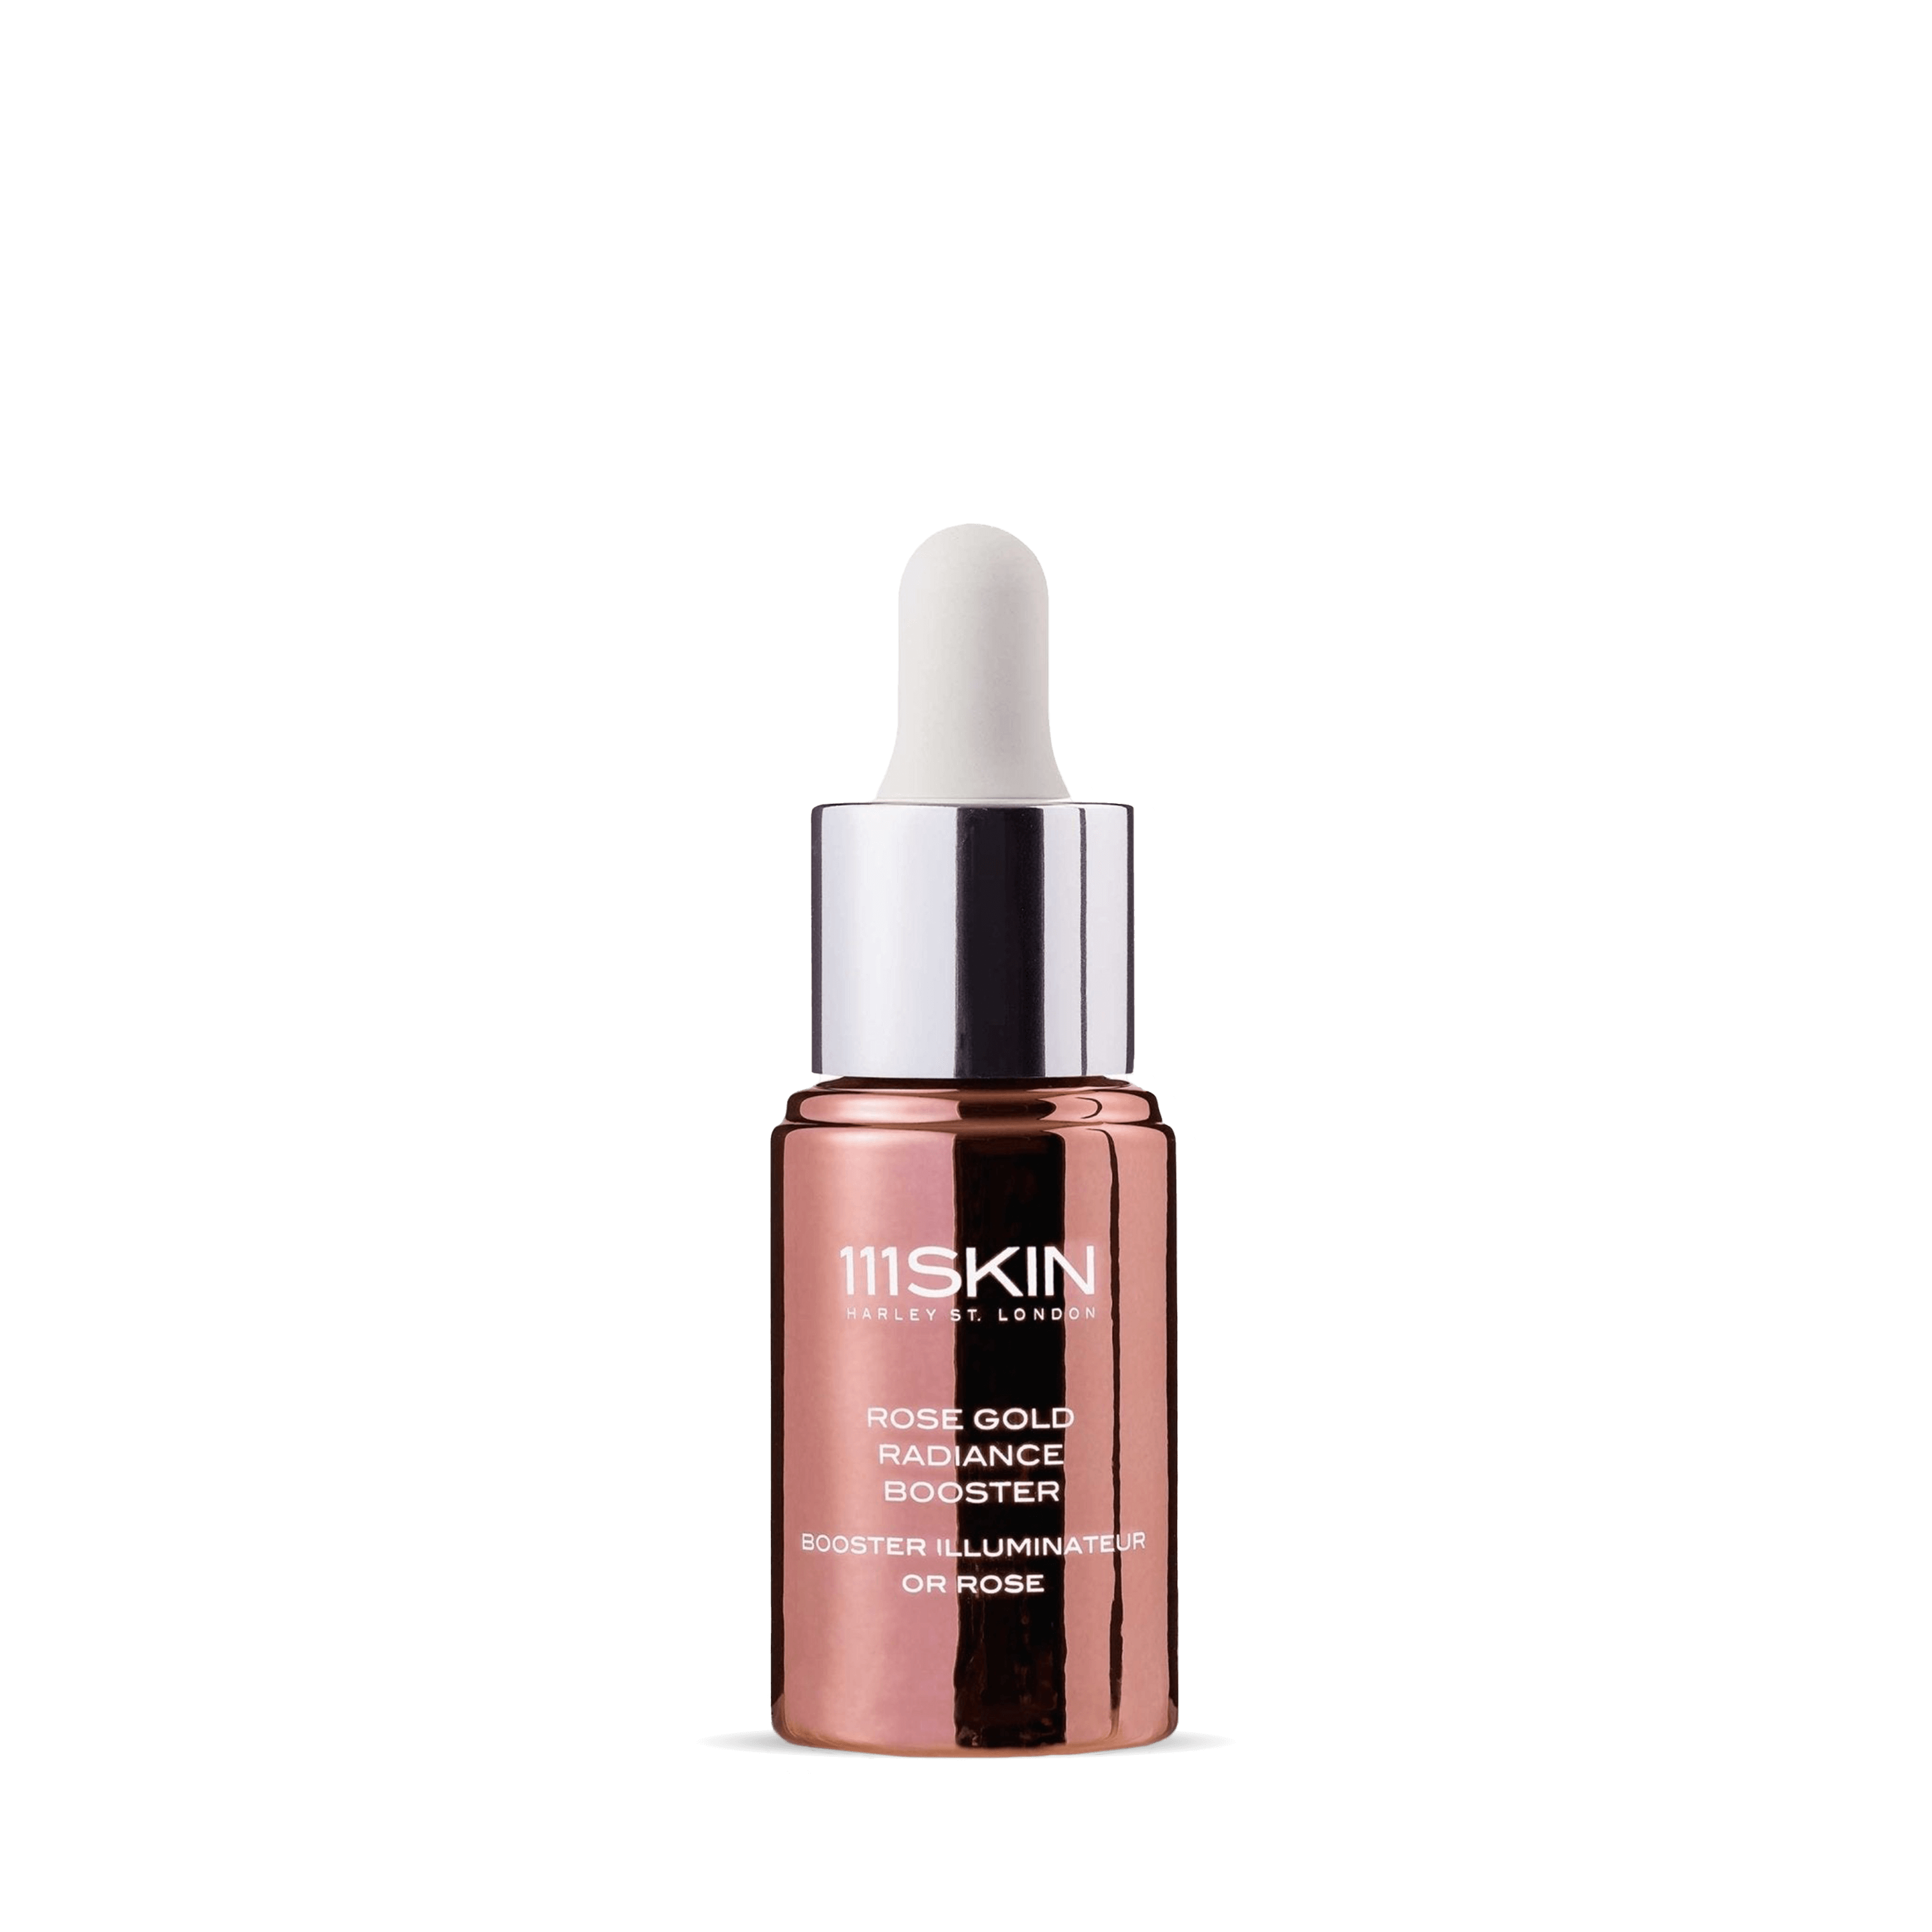 Bulgarian rose BRIGHTENING AND SMOOTHING SERUM for FACE AND AROUND THE EYE  30ml